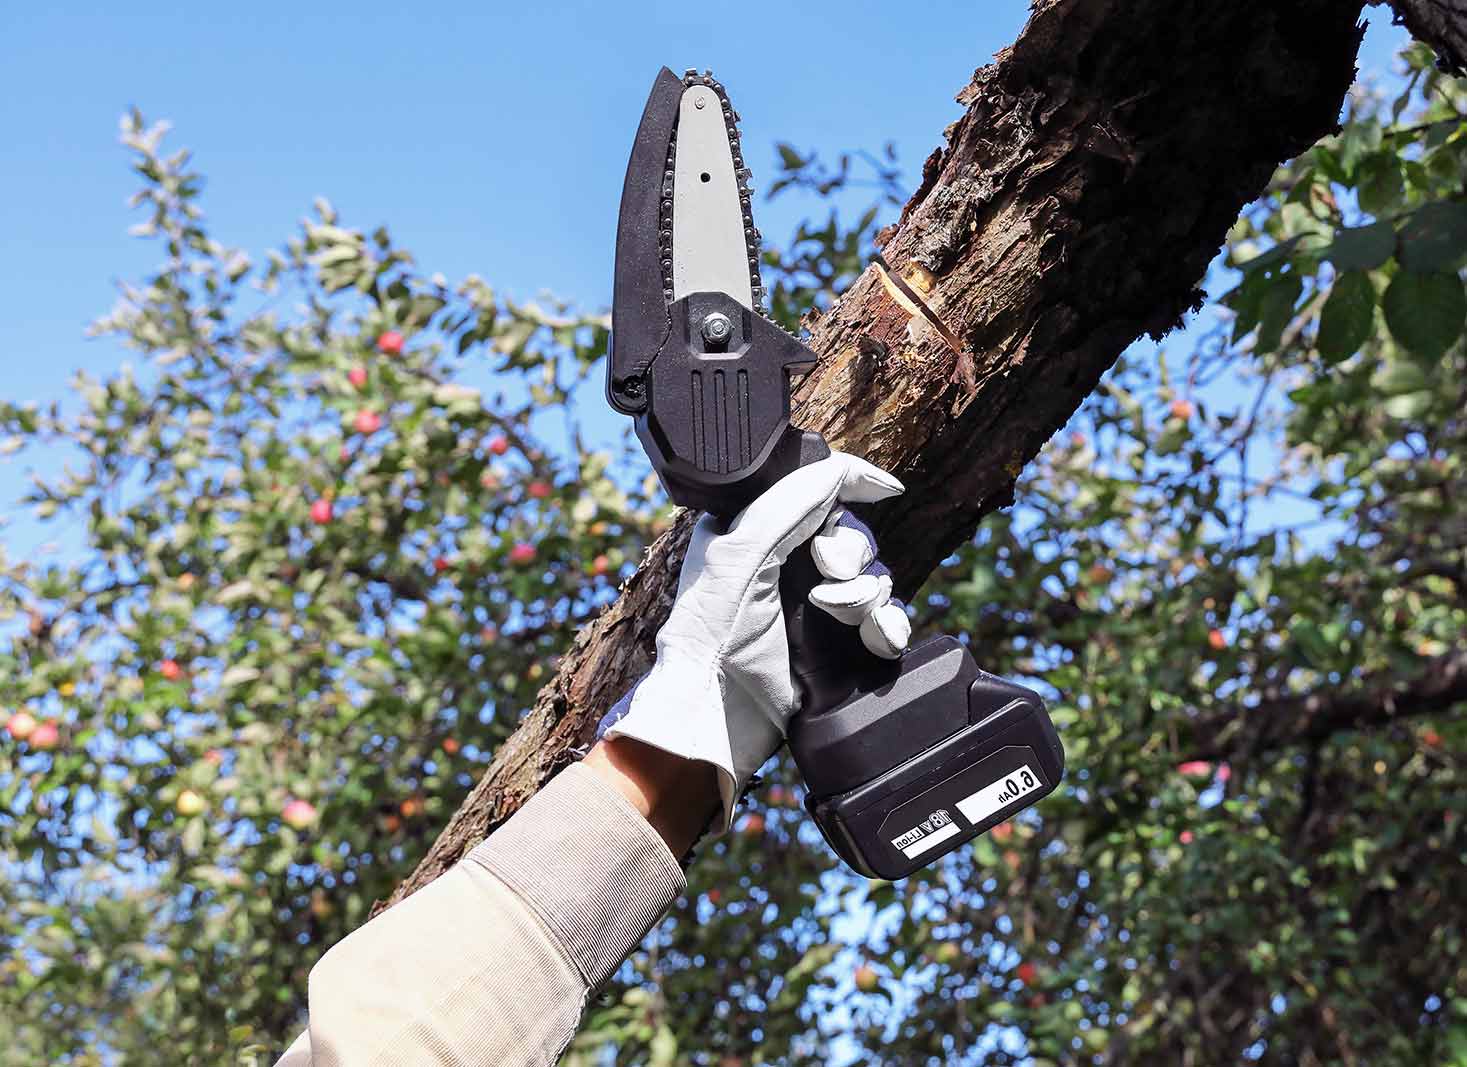 Common Pruning Mistakes to Avoid